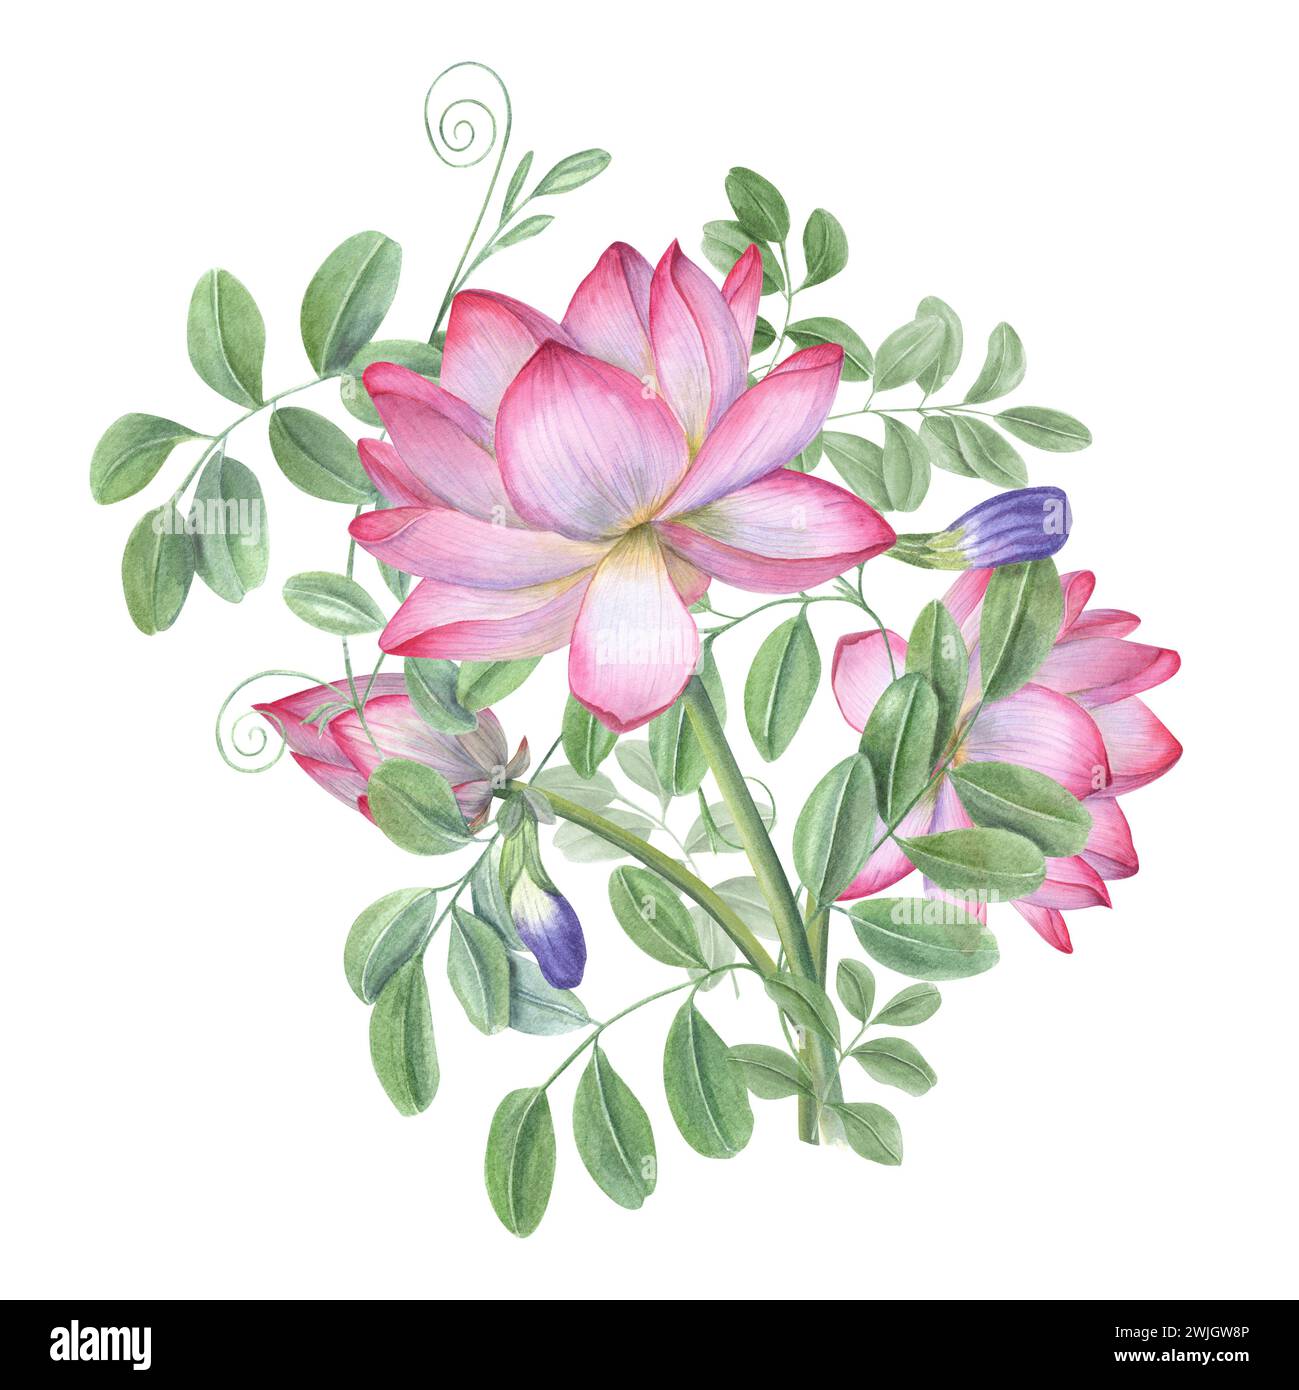 Bouquet of blue clitoria ternatea and lotus. Blooming flowers, green leaves. Waterlilies, wisteria. Bud, flower, leaf, stem. Watercolor illustration Stock Photo